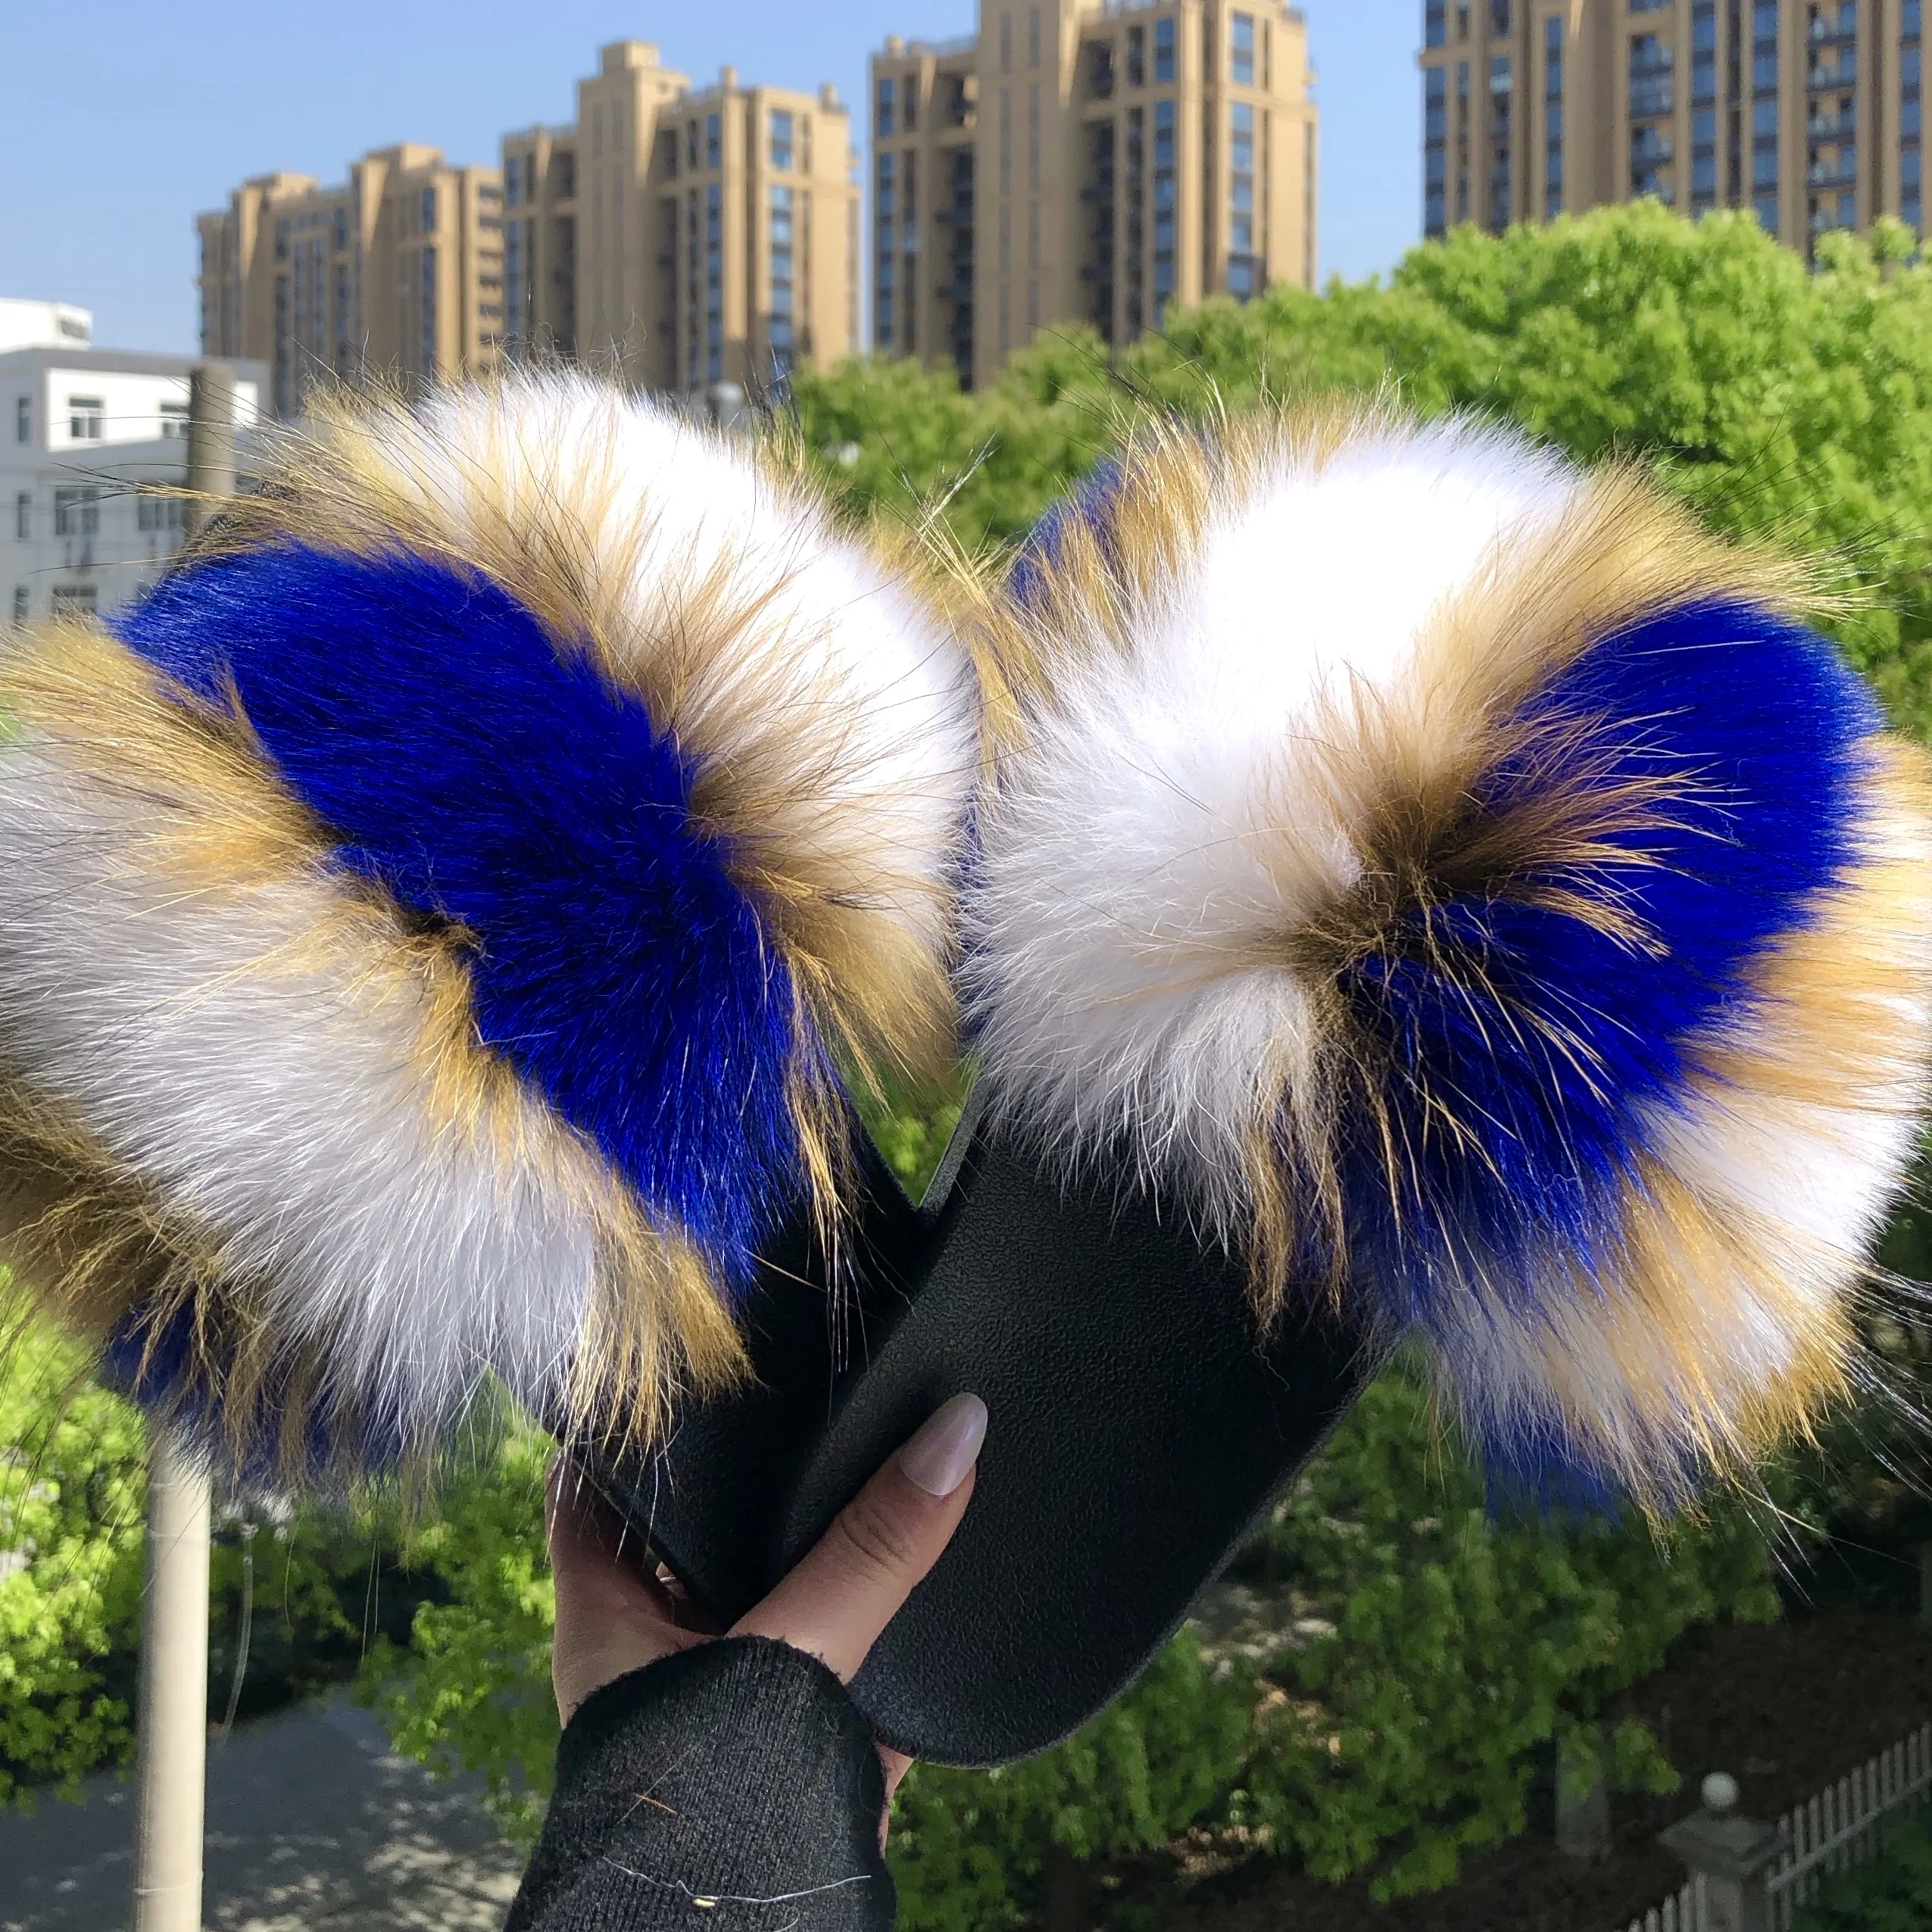 

Wholesale Summer Furry Sandals Fluffy Real Fox Hair Fashion Fur Slippers Raccoon Fur Slides for Women, As picture show or customized